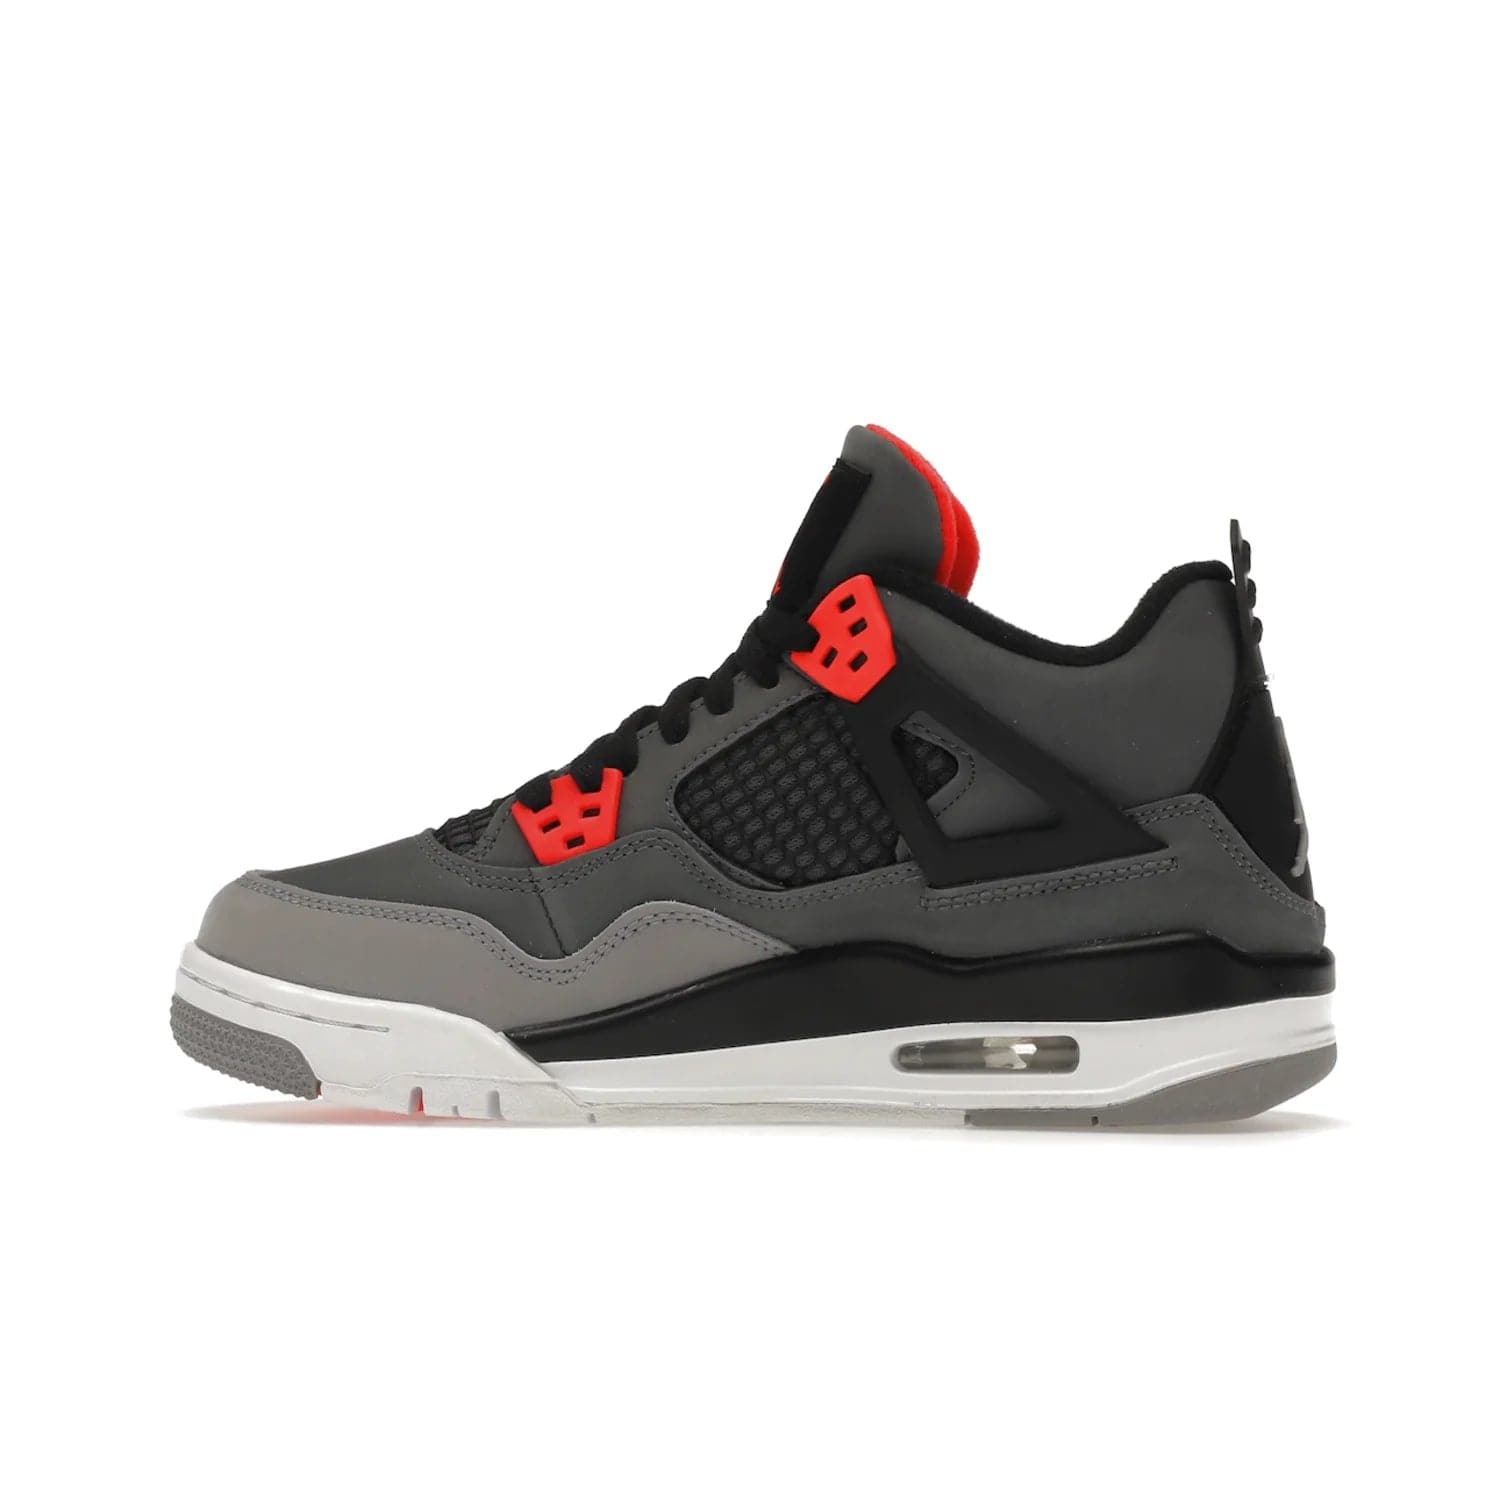 Jordan 4 Retro Infrared (GS) - Image 20 - Only at www.BallersClubKickz.com - Shop the Air Jordan 4 Retro Infrared (GS) for a classic silhouette with subtle yet bold features. Dark grey nubuck upper with lighter forefoot overlay, black accents, Infrared molded eyelets & woven tongue tag. Available June 2022.